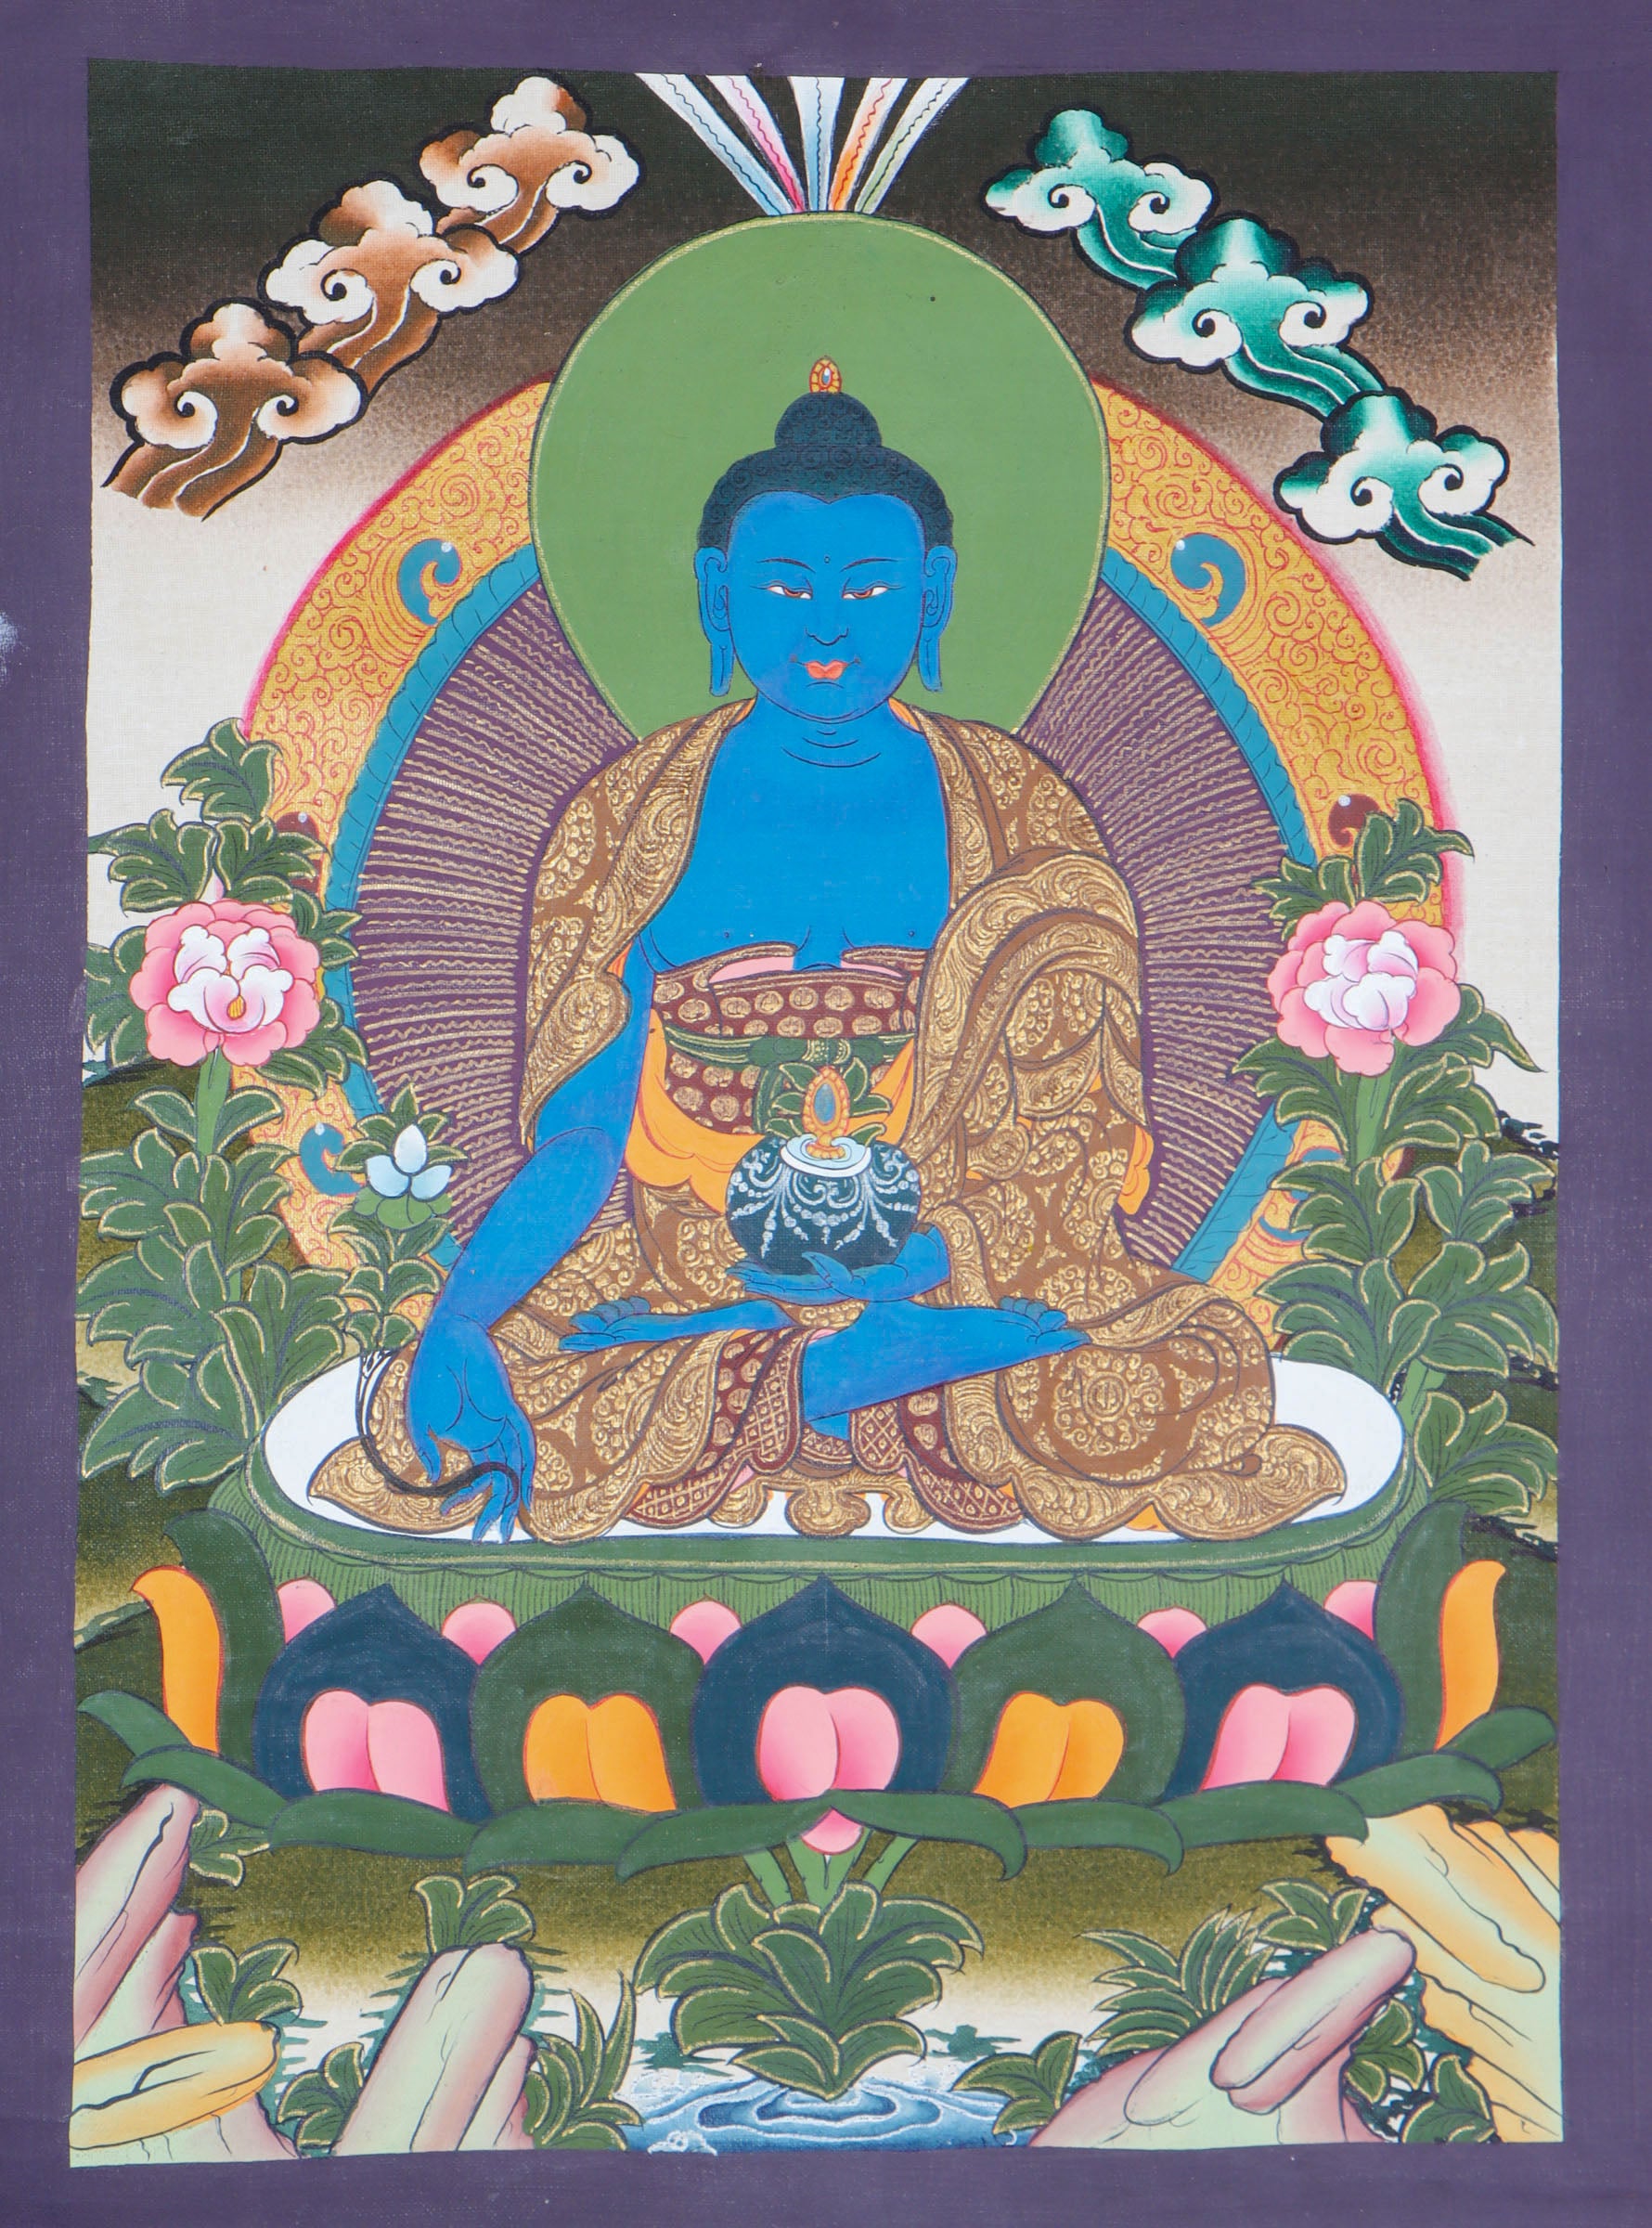  Medicine Buddha Thangka is meticulously hand-painted with vibrant colors. Himalayas Shop